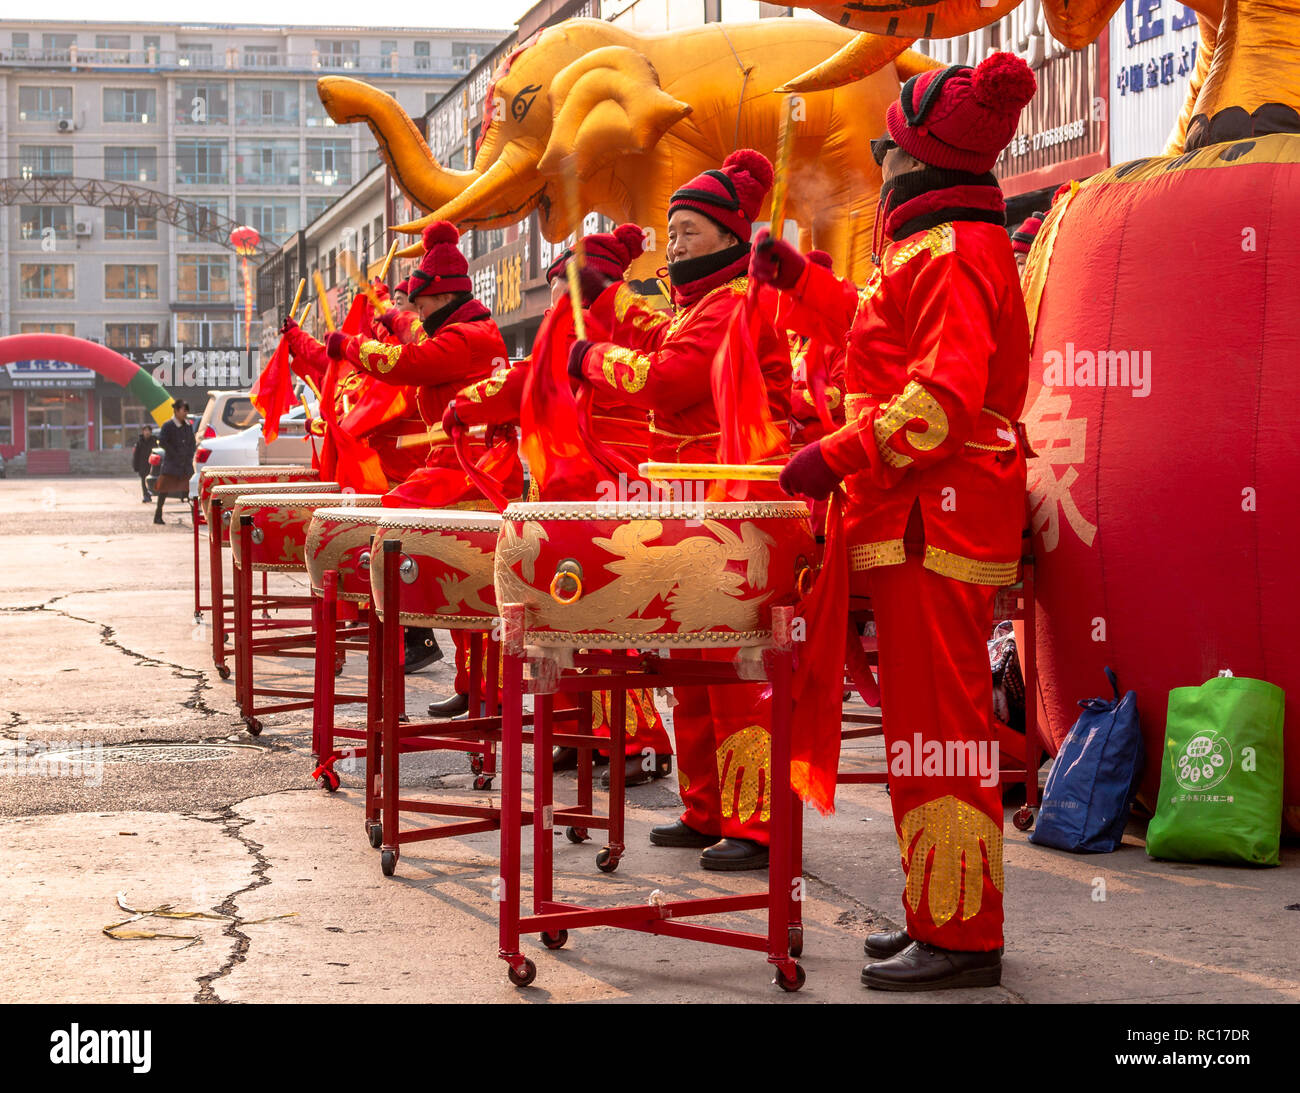 Women in red golden outfits drumming during the ceremonial of the opening of a store in Hunchun city of China, Jilin Province in the Yanbian Prefecture Stock Photo